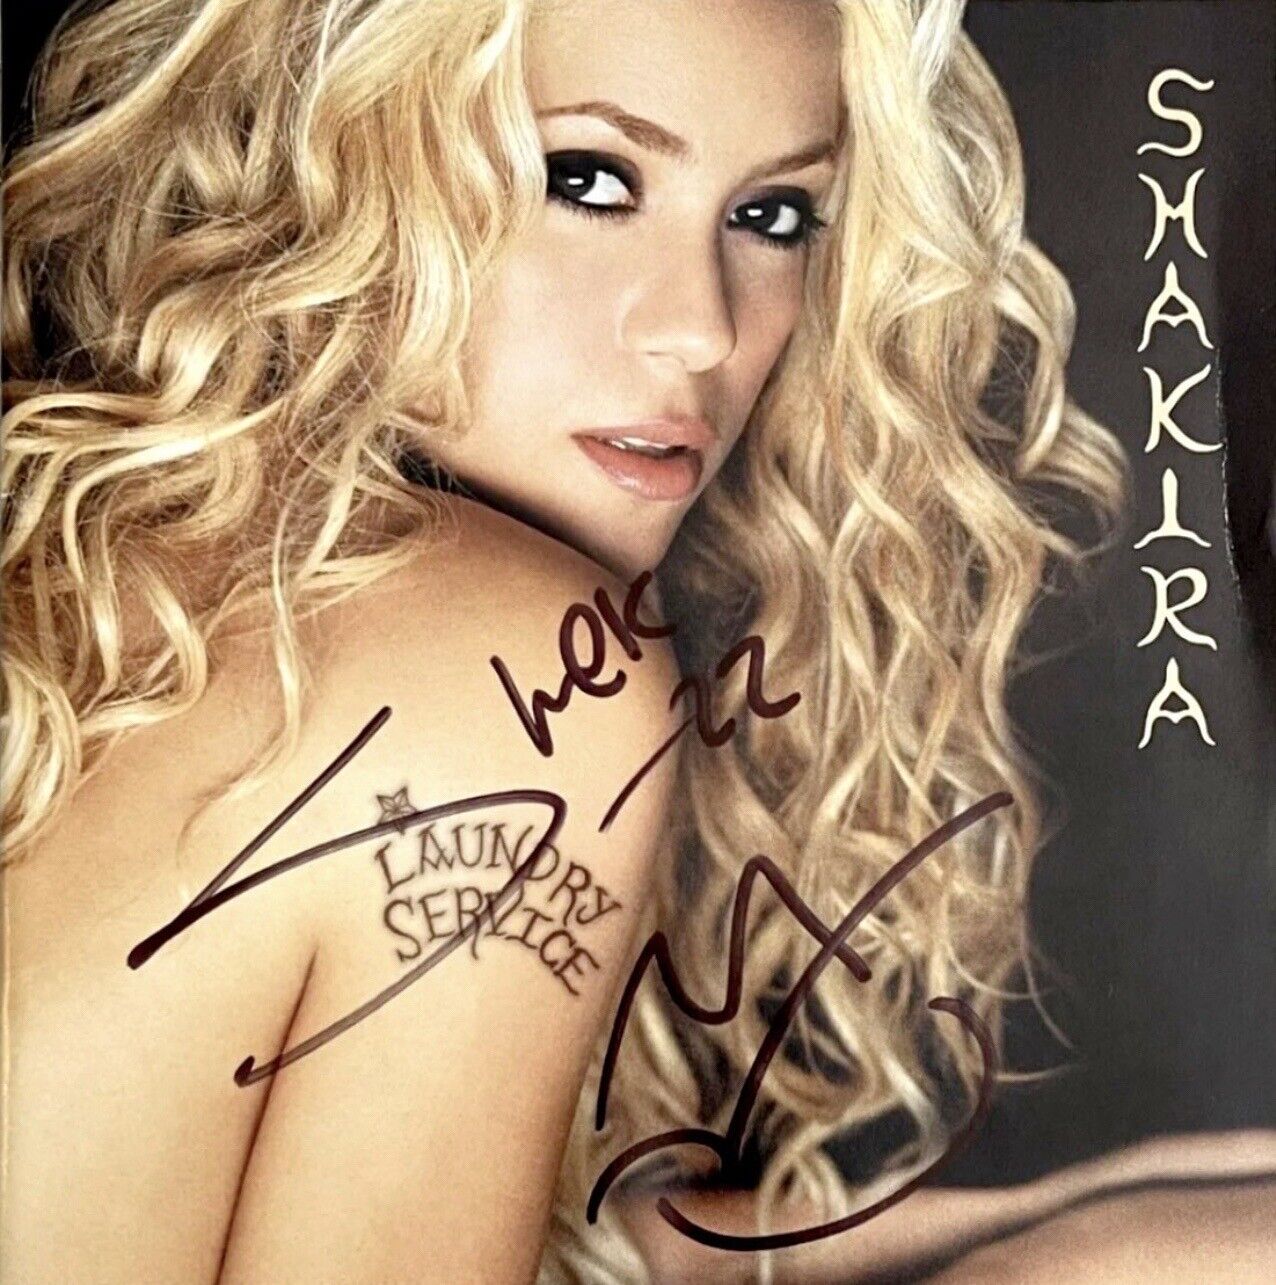 SHAKIRA AUTOGRAPH SIGNED LAUNDRY SERVICE CD BOOKLET